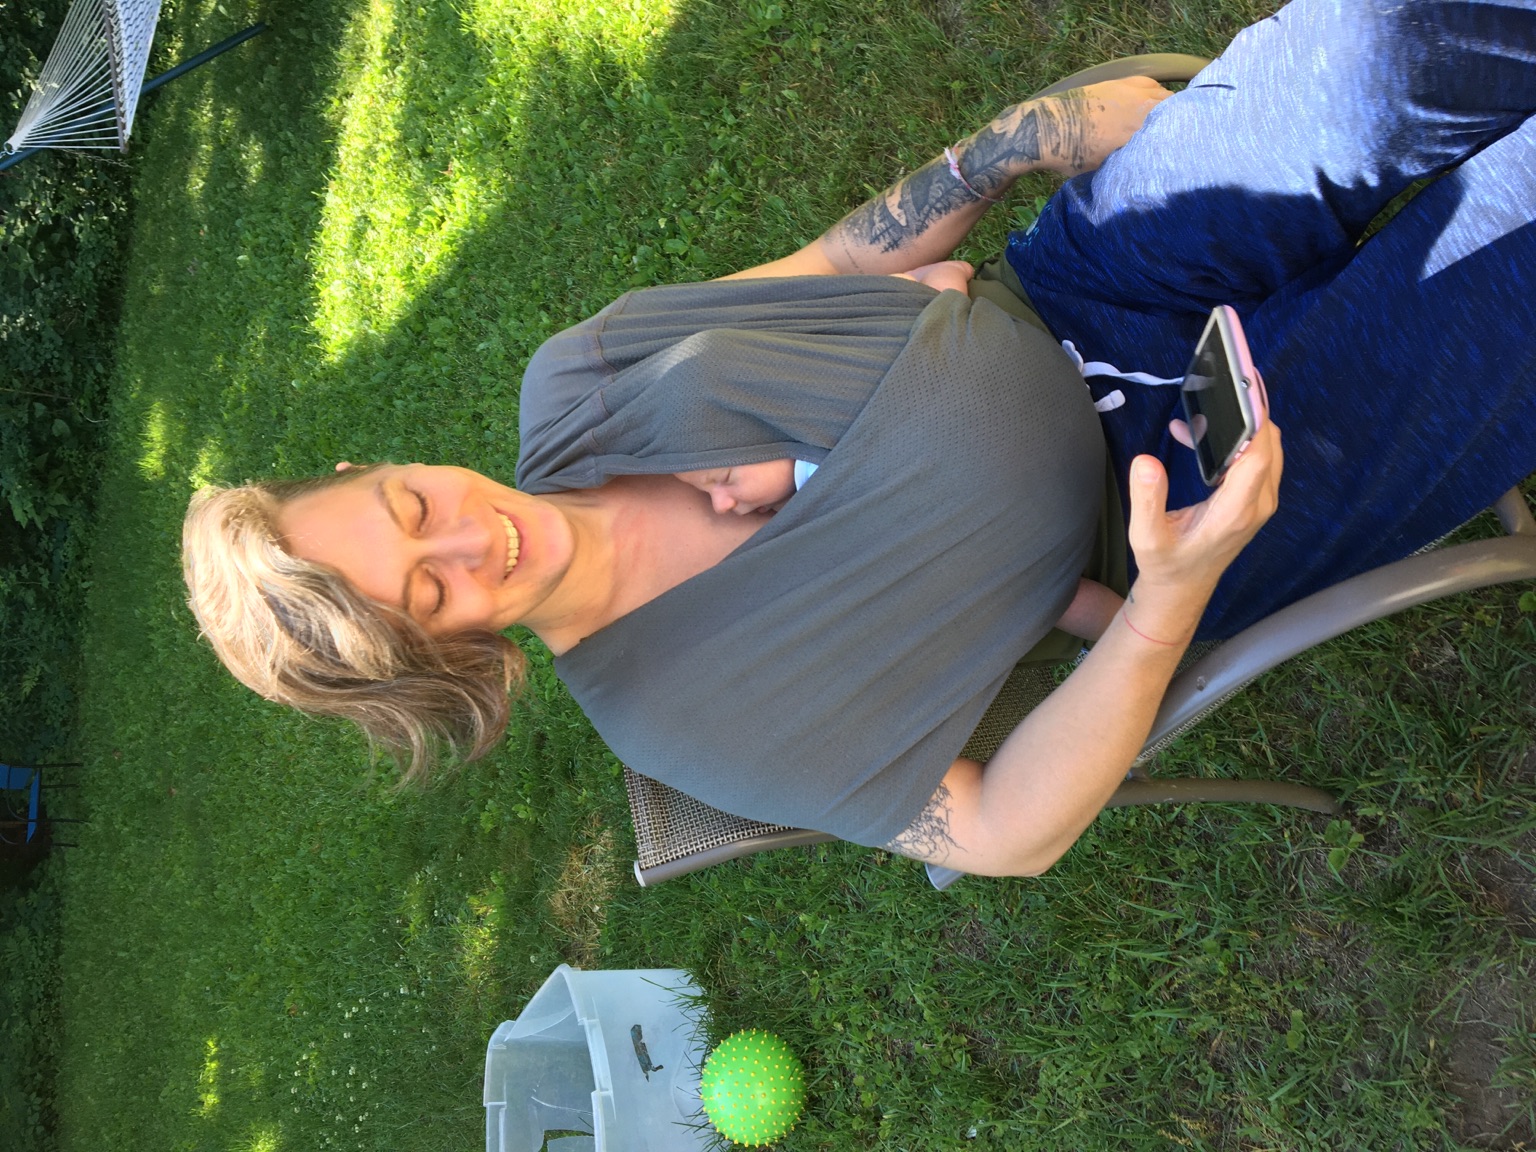 A white trans woman with tattooed arms sits in a sunny, green back yard with a sleeping baby face peeking out of a sling on her chest. She is smiling but avoiding eye contact with the camera by looking at a phone in her hand. At least one side of her head is buzzed; the rest of her hair is brunette and chin length.